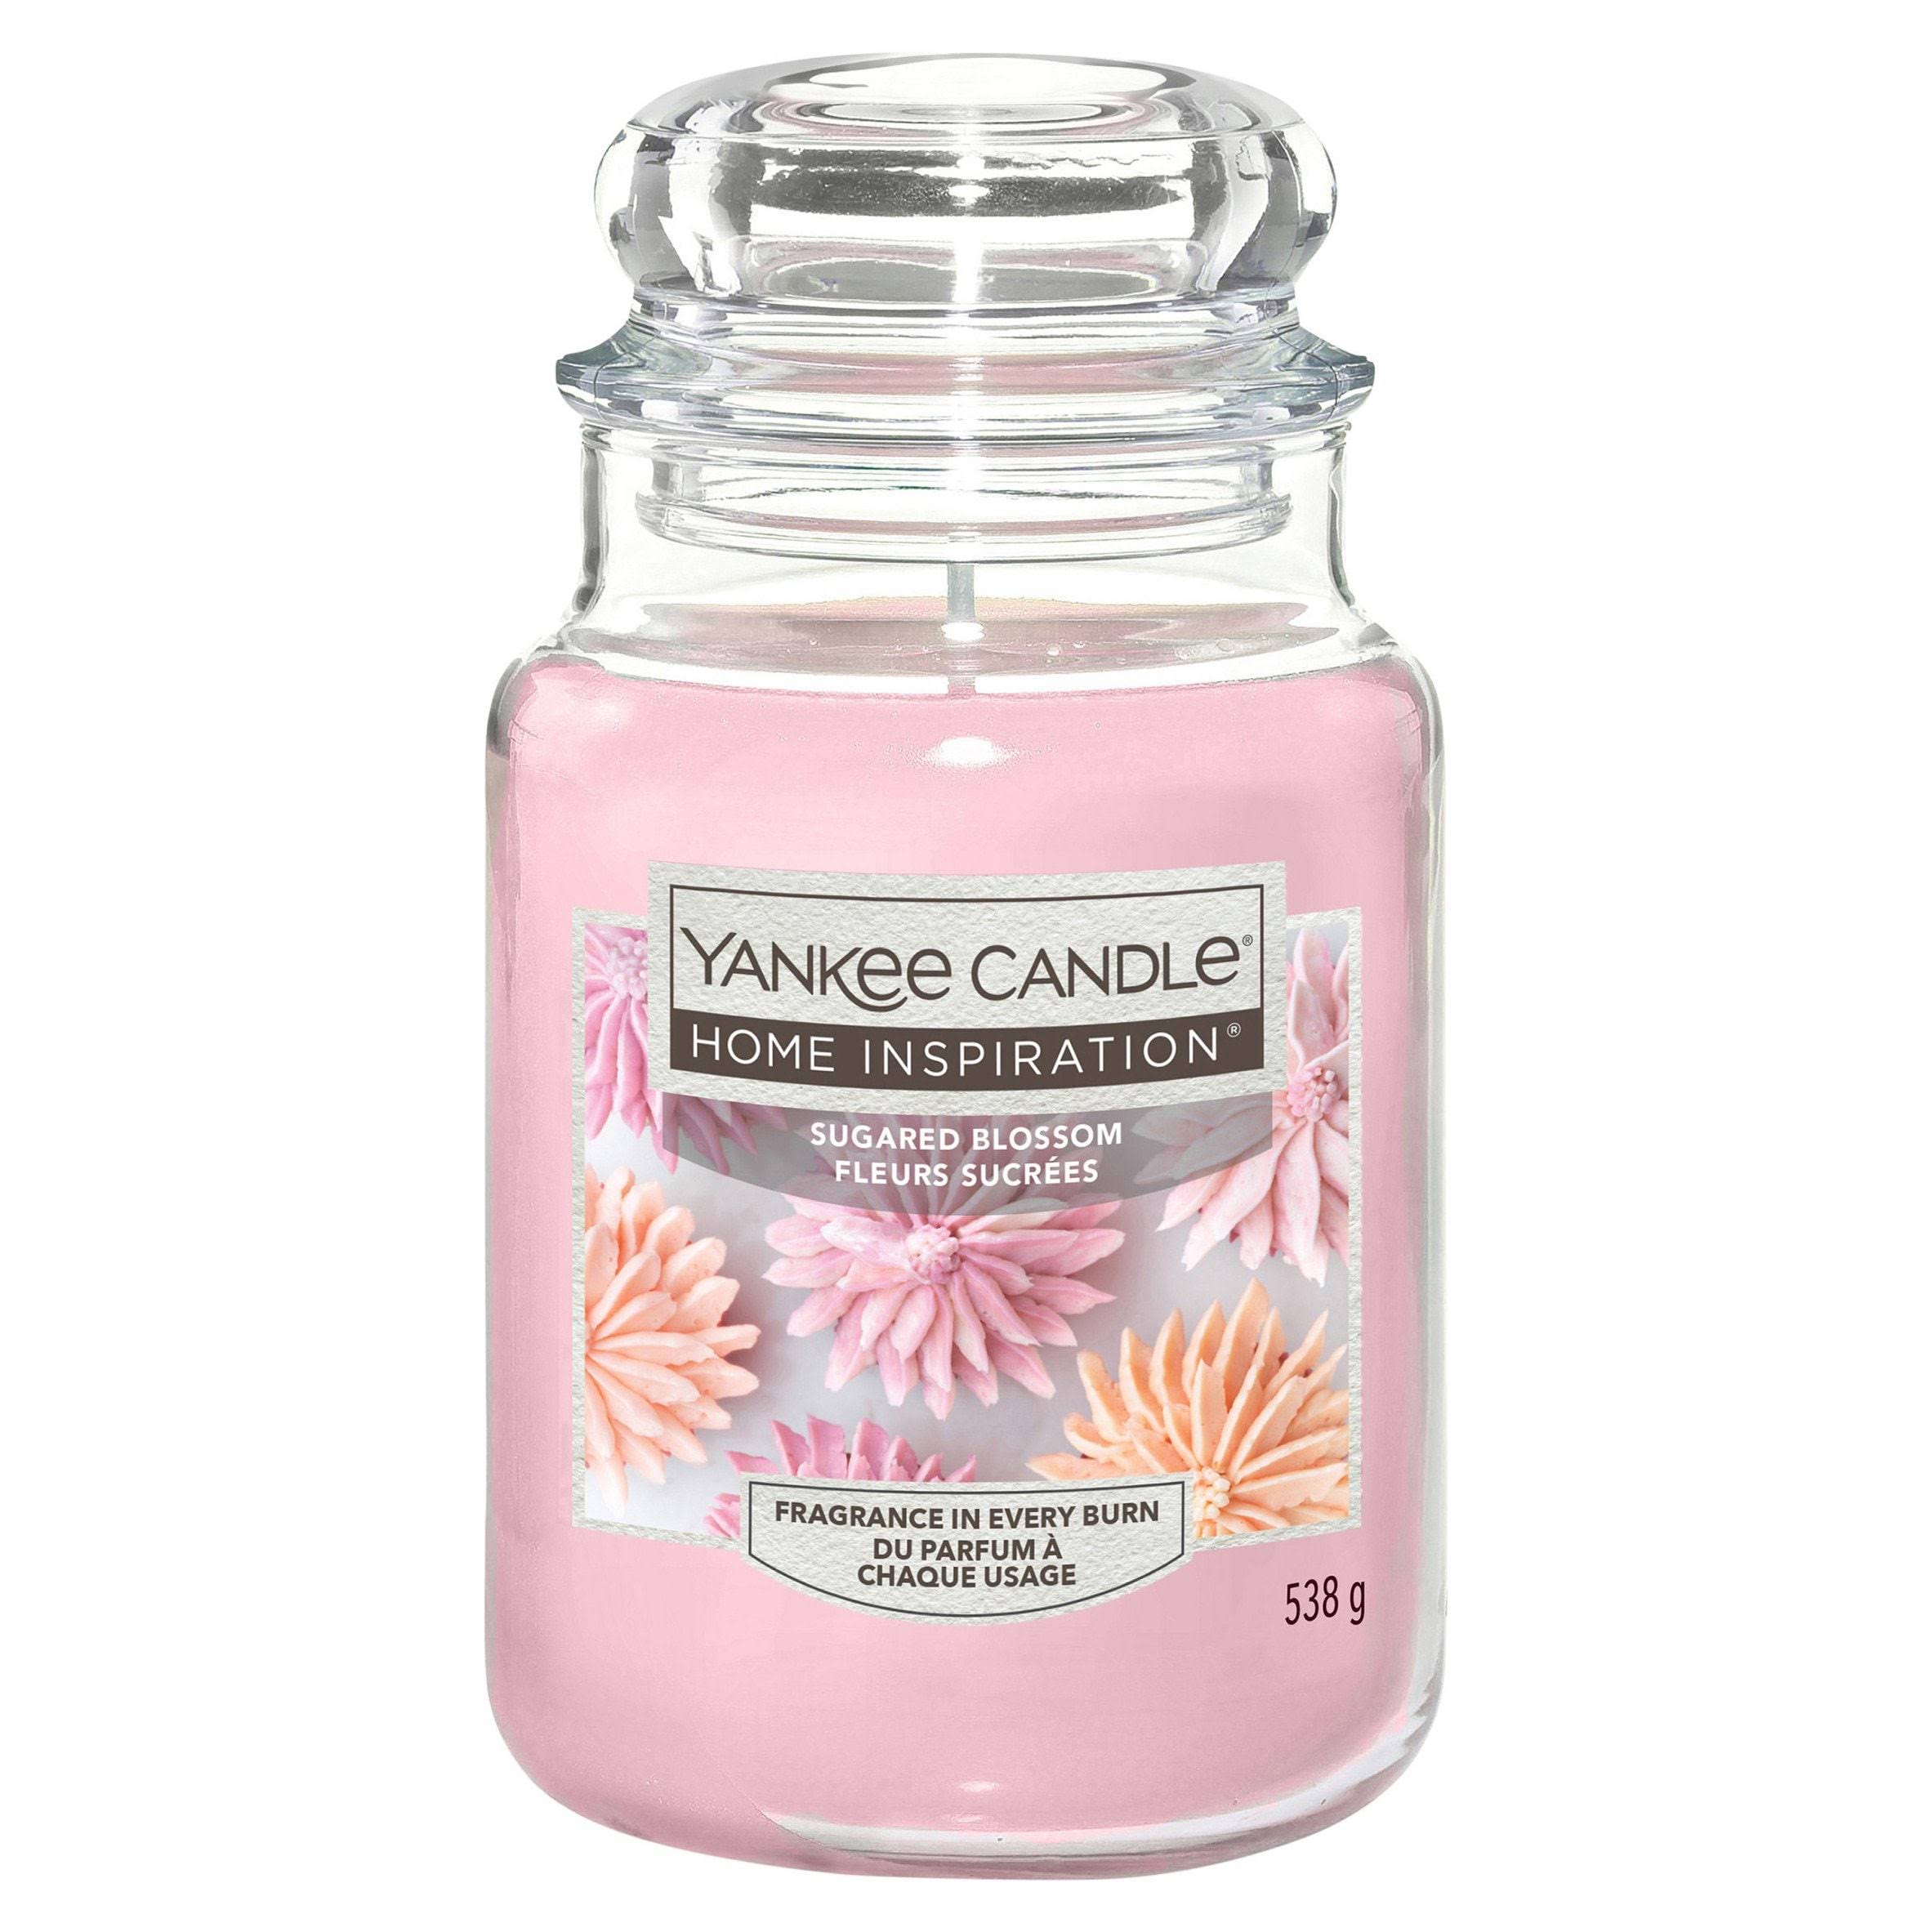 Yankee Candle Sparkling Winterberry Wax Melt